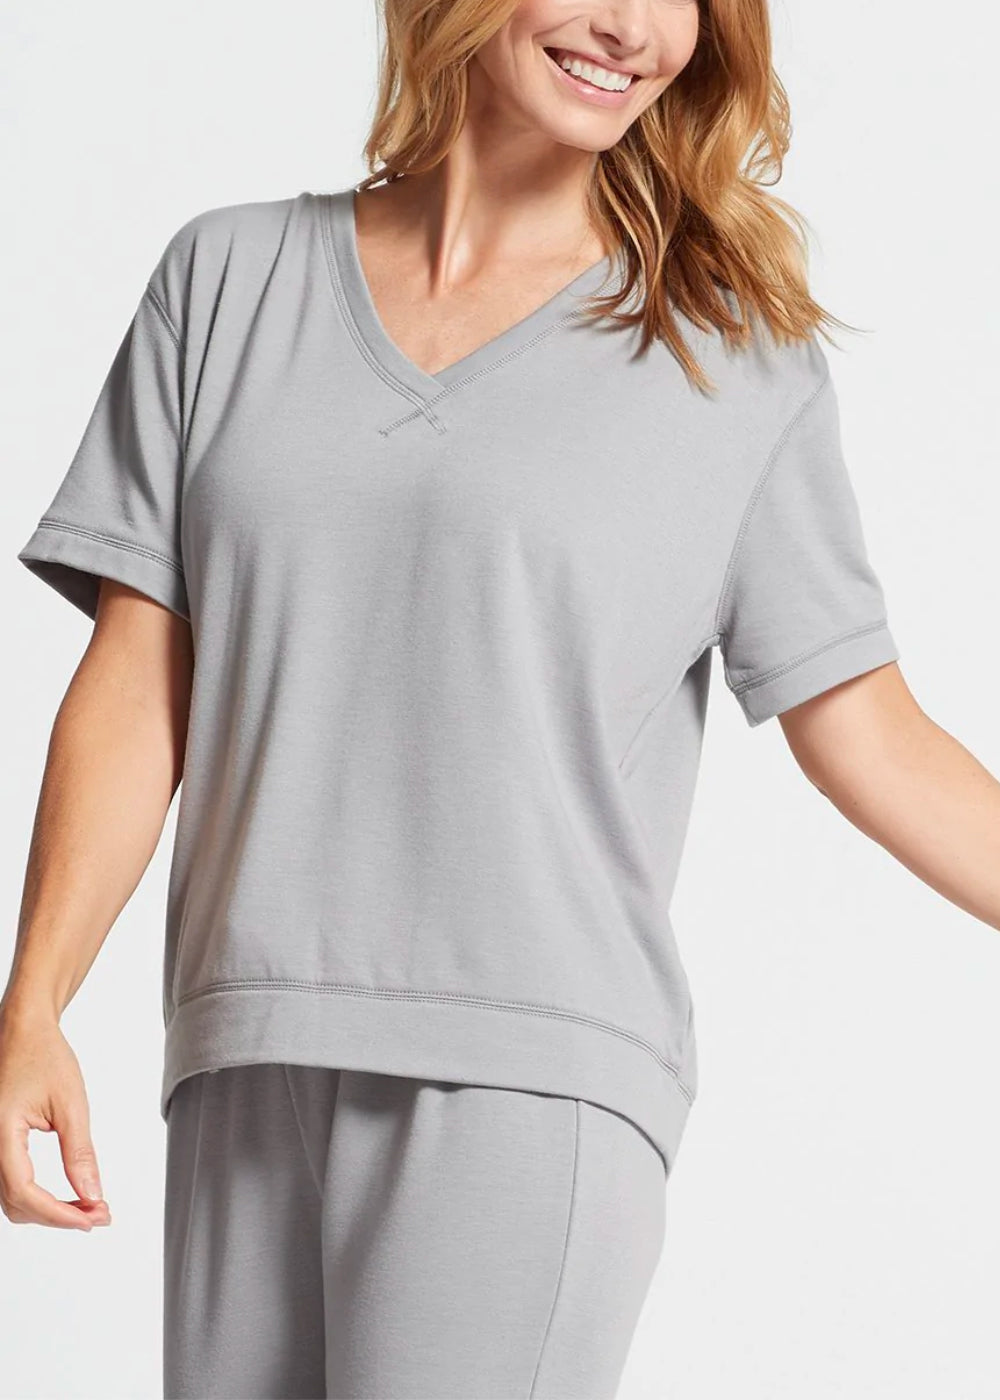 V-neck Lounge Tee - Baby French Terry from Yummie in Weathered Grey  - 1